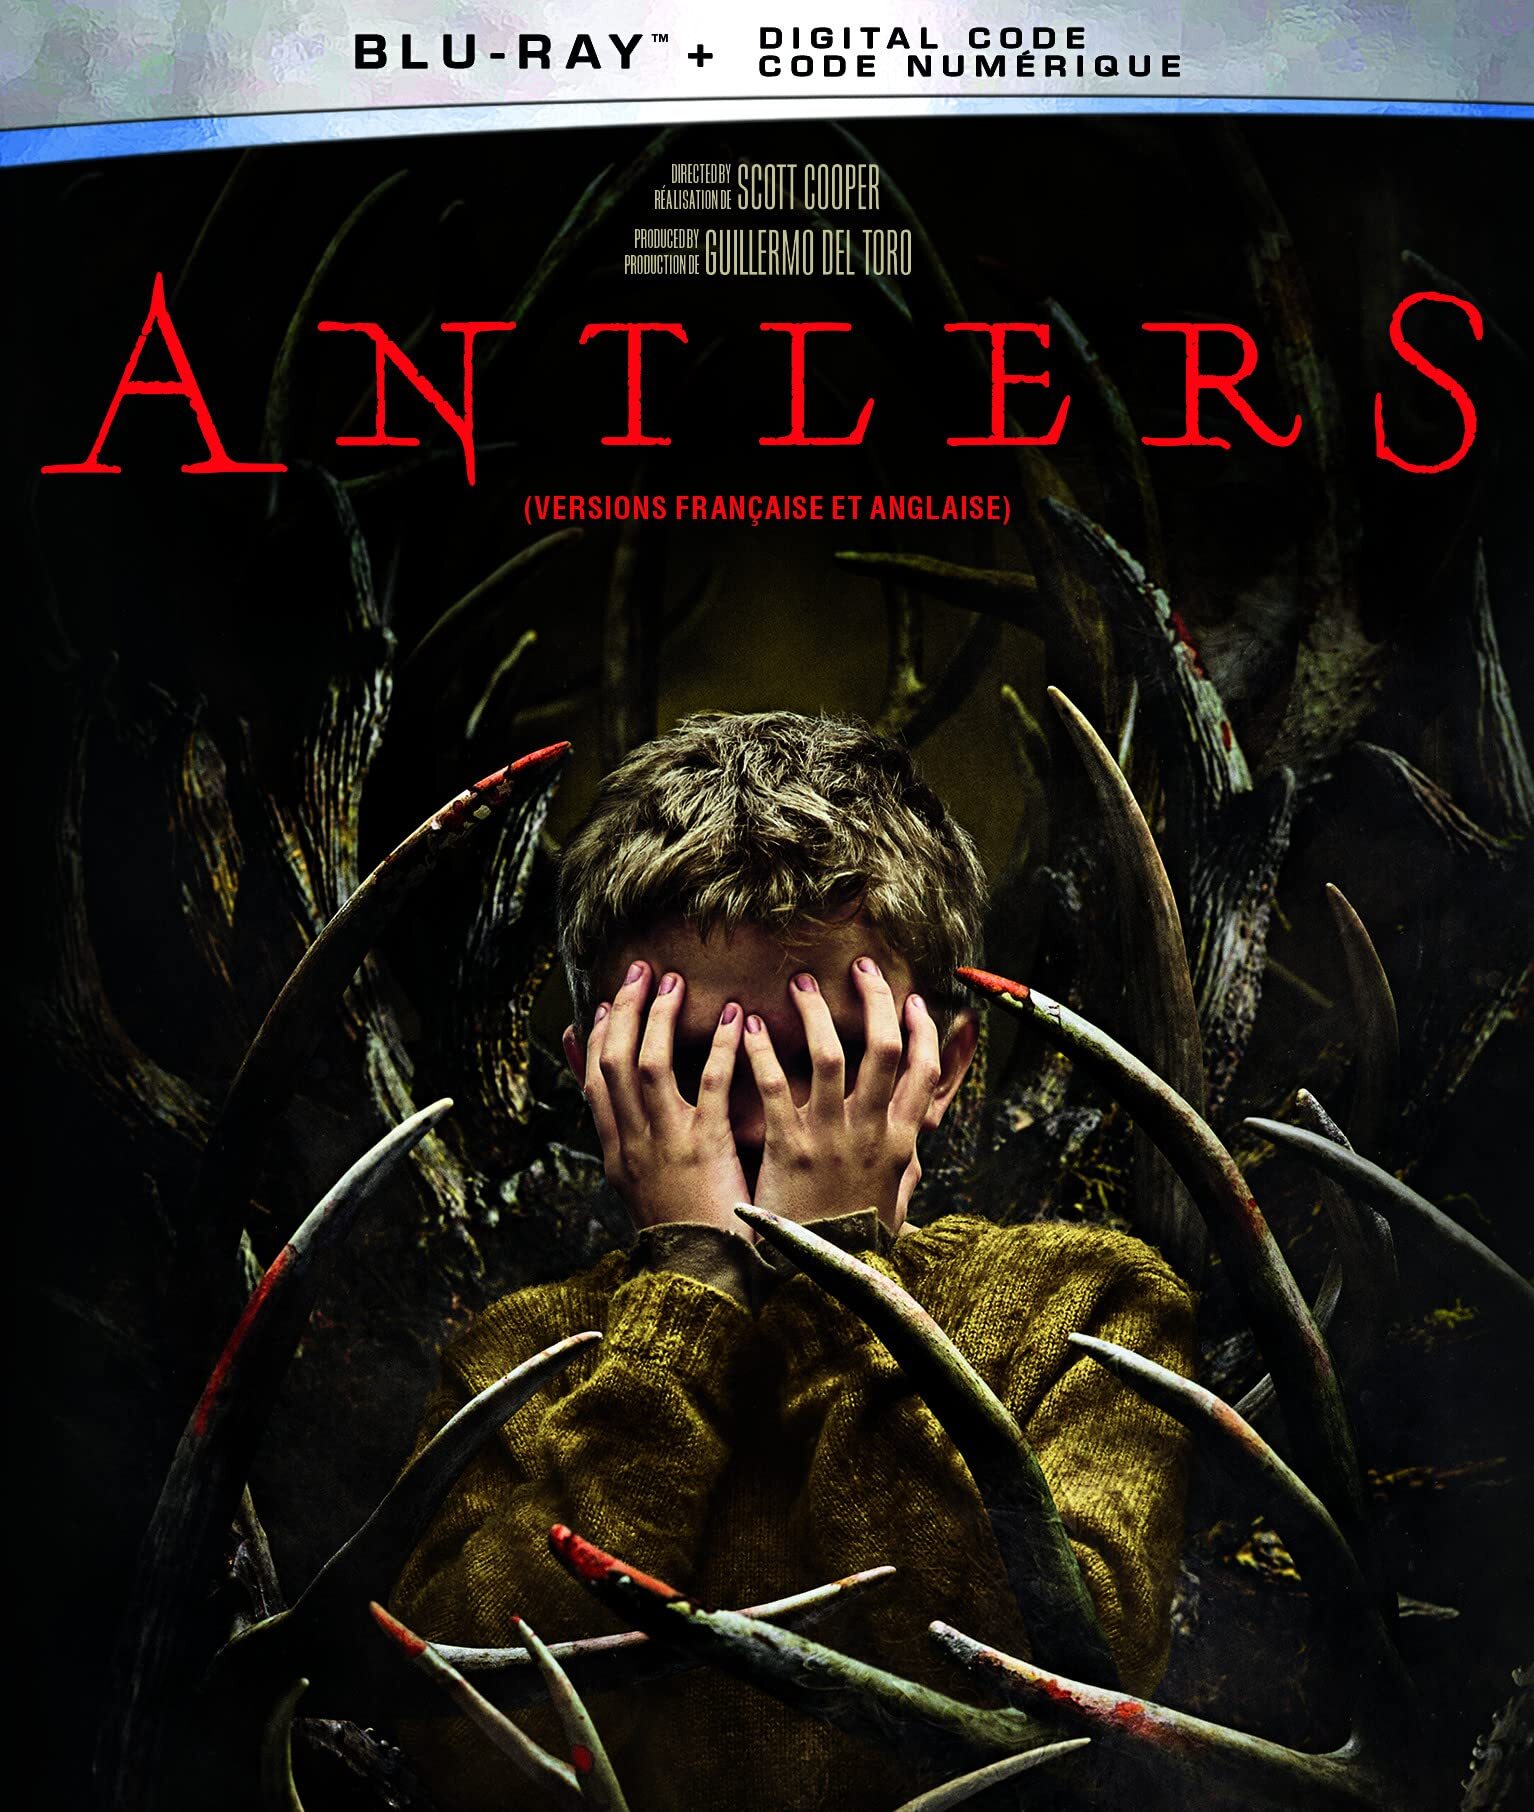 Antlers (2021) Antlers: Criatura Oscura (2021) Espíritus Oscuros (2021) [AC3 5.1 + SUP] [Blu Ray]  307914_front